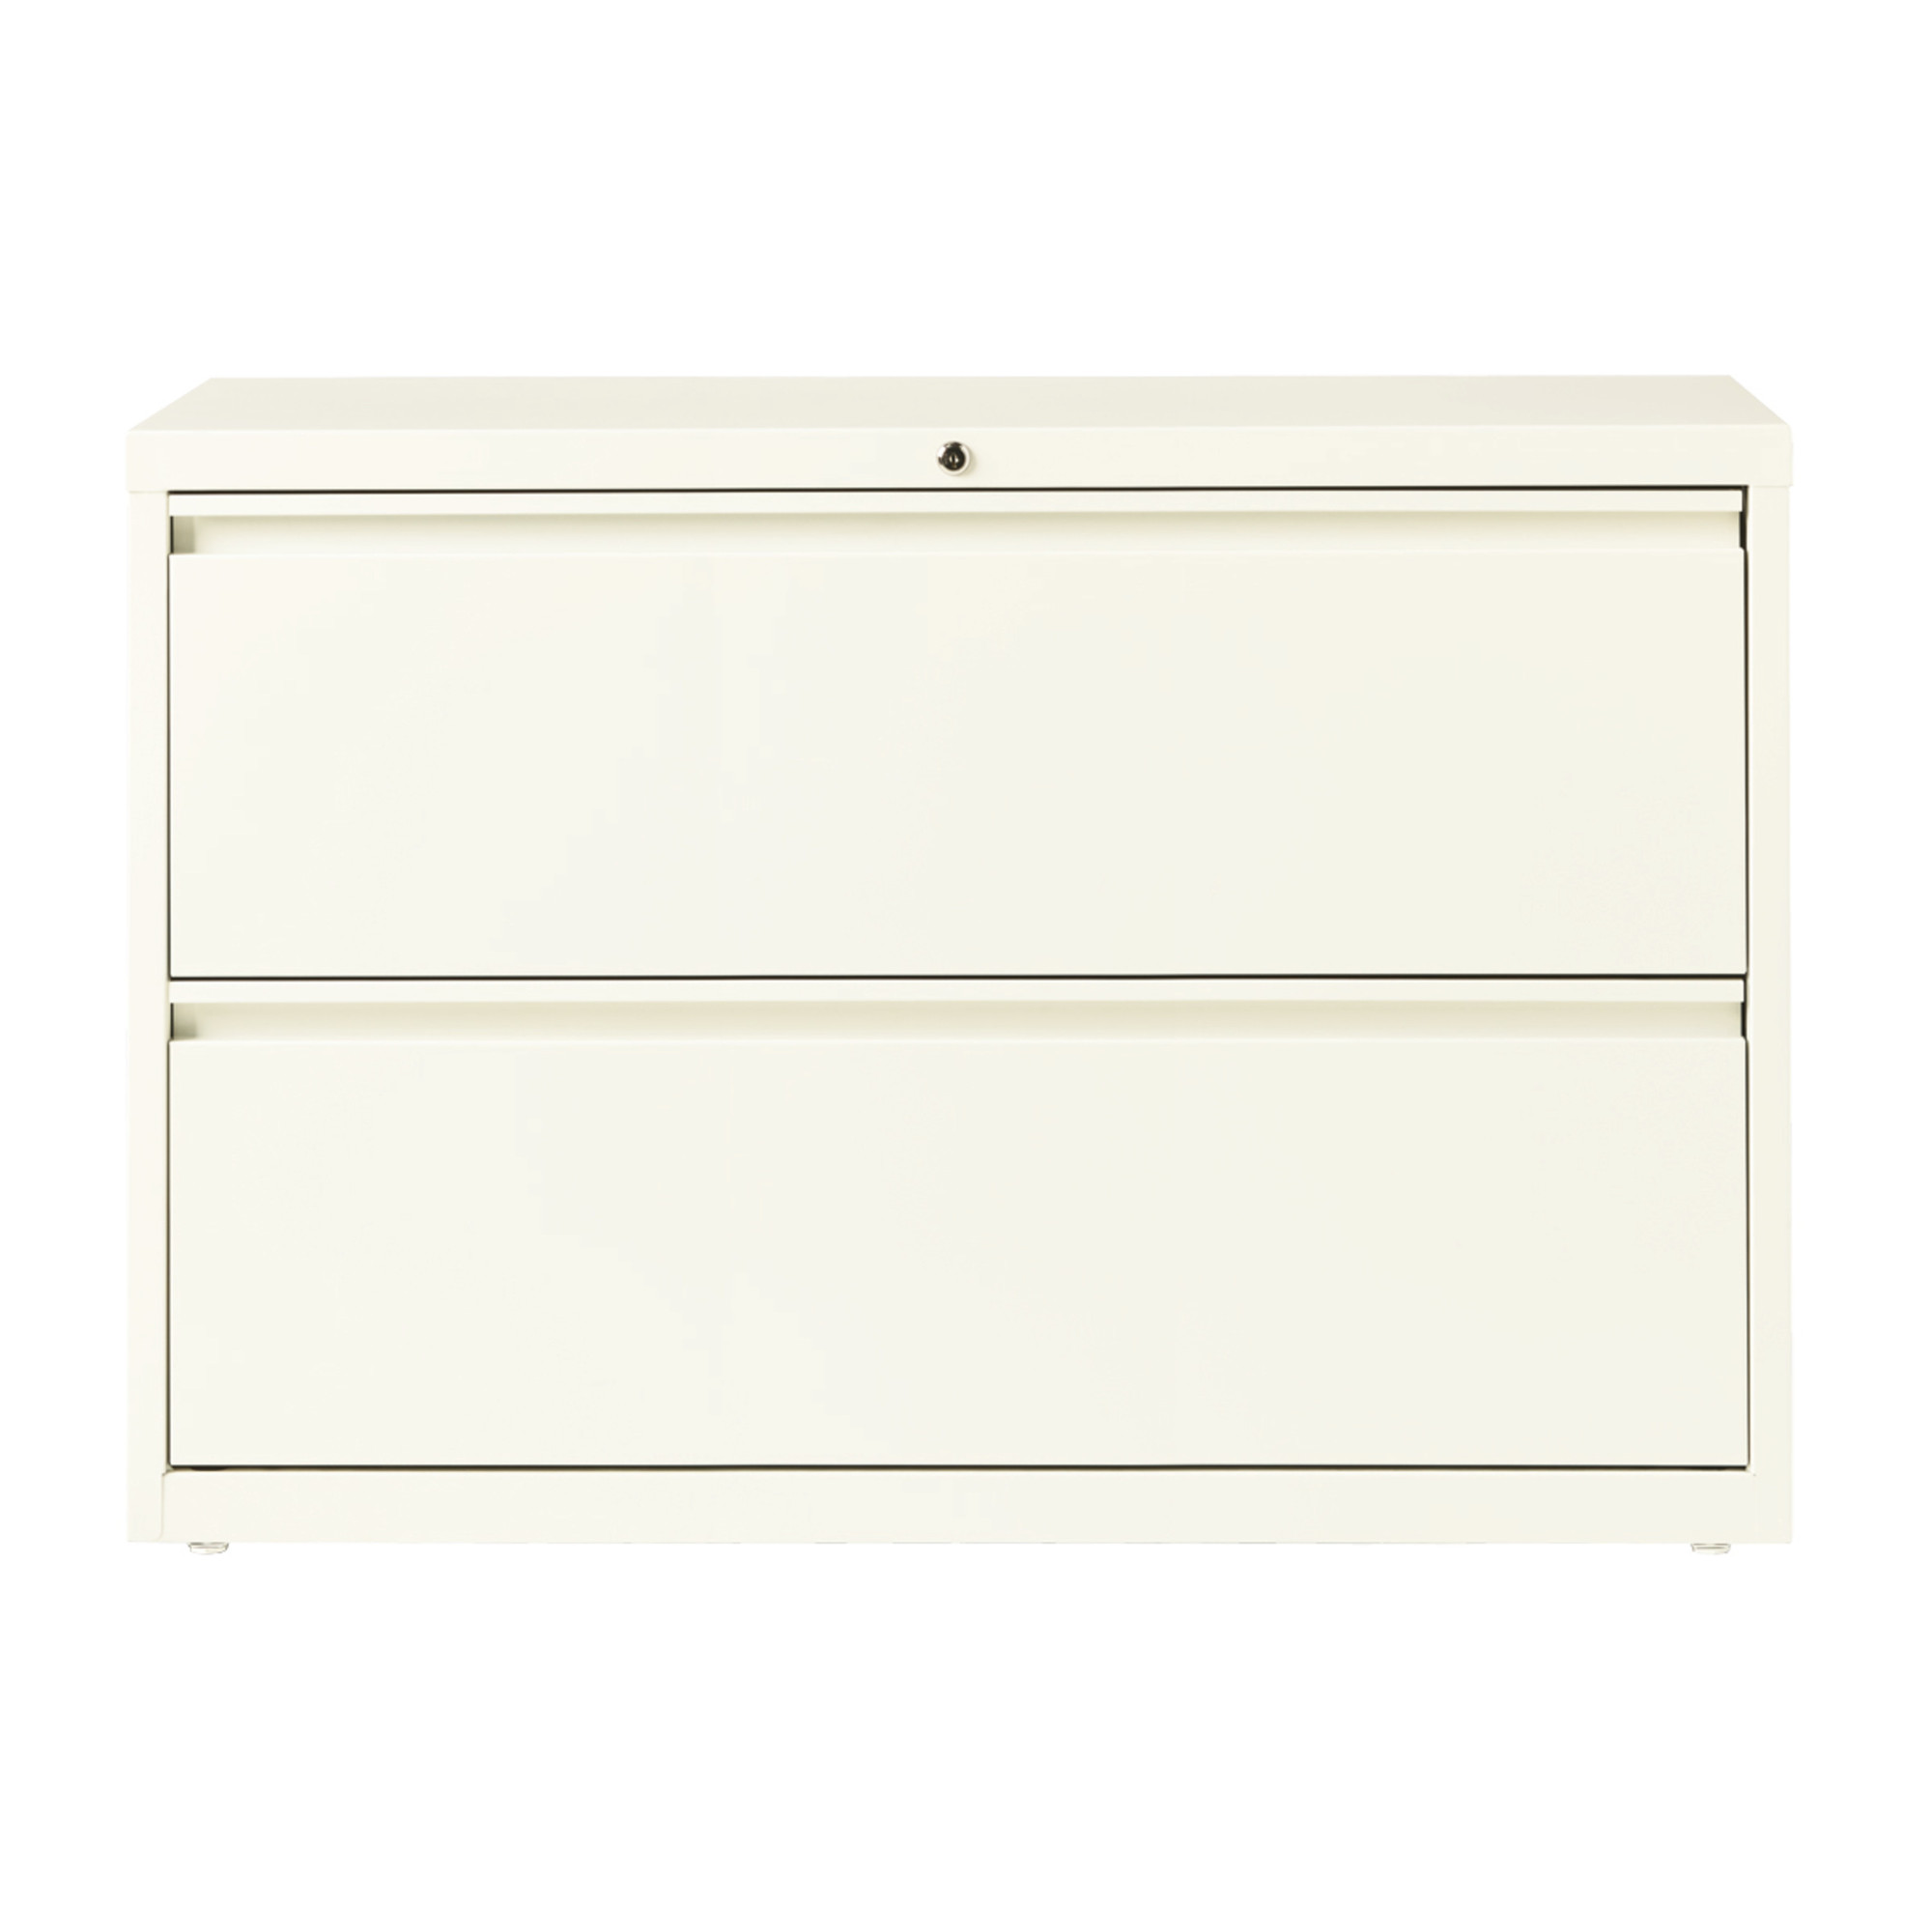 Hirsh Industries, 2 Drawer Lateral File Cabinet, Width 42 in, Depth 18.625 in, Height 28 in, Model 20662